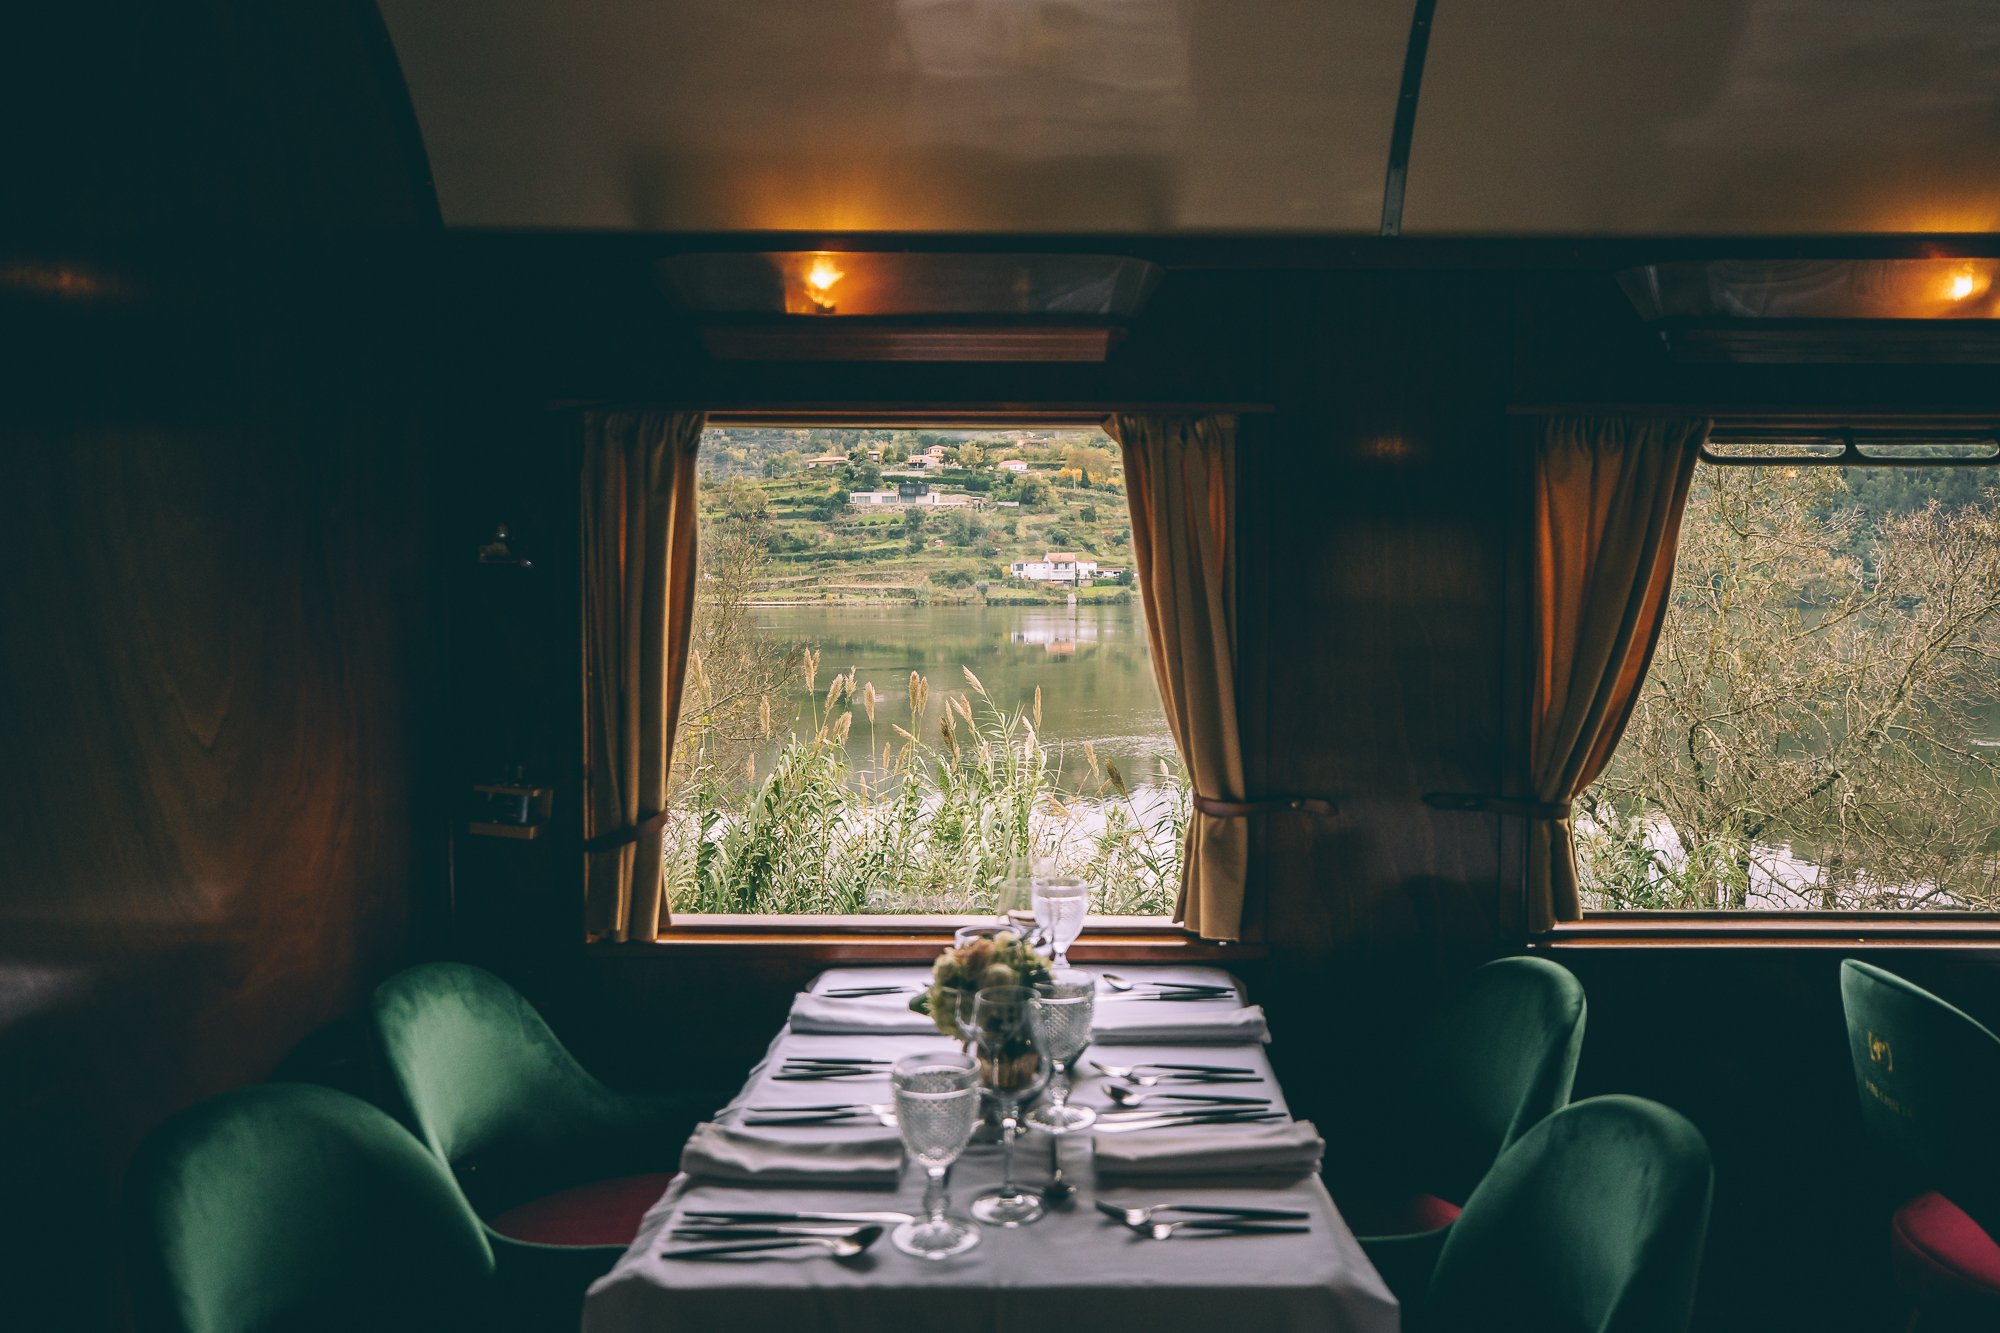 The picturesque Douro Valley unfolds, with terraced vineyards, meandering Douro River, and rolling hills, illustrating the breathtaking scenery witnessed during the Presidential Train journey.